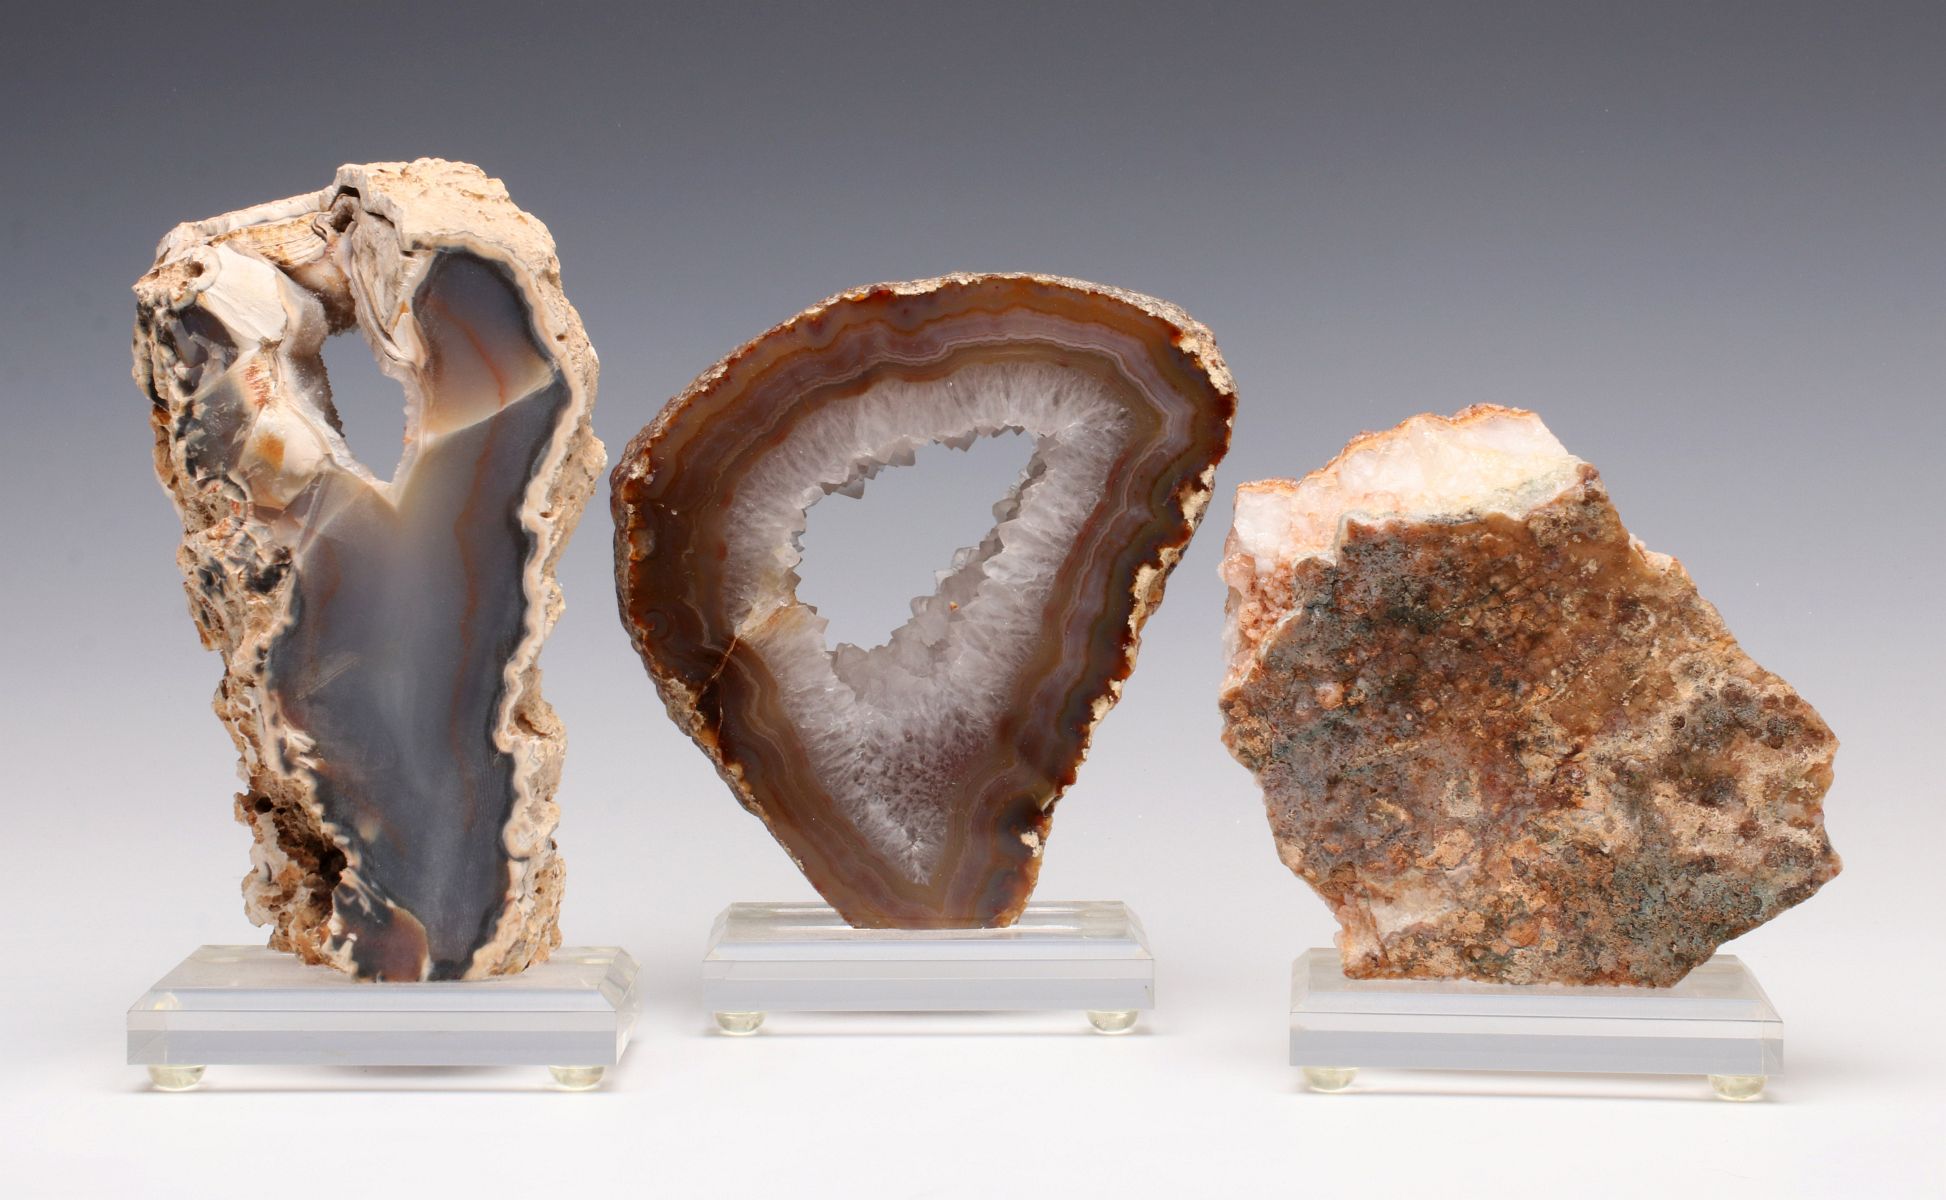 POLISHED GEODES AND MINERALS ON LUCITE DISPLAYS